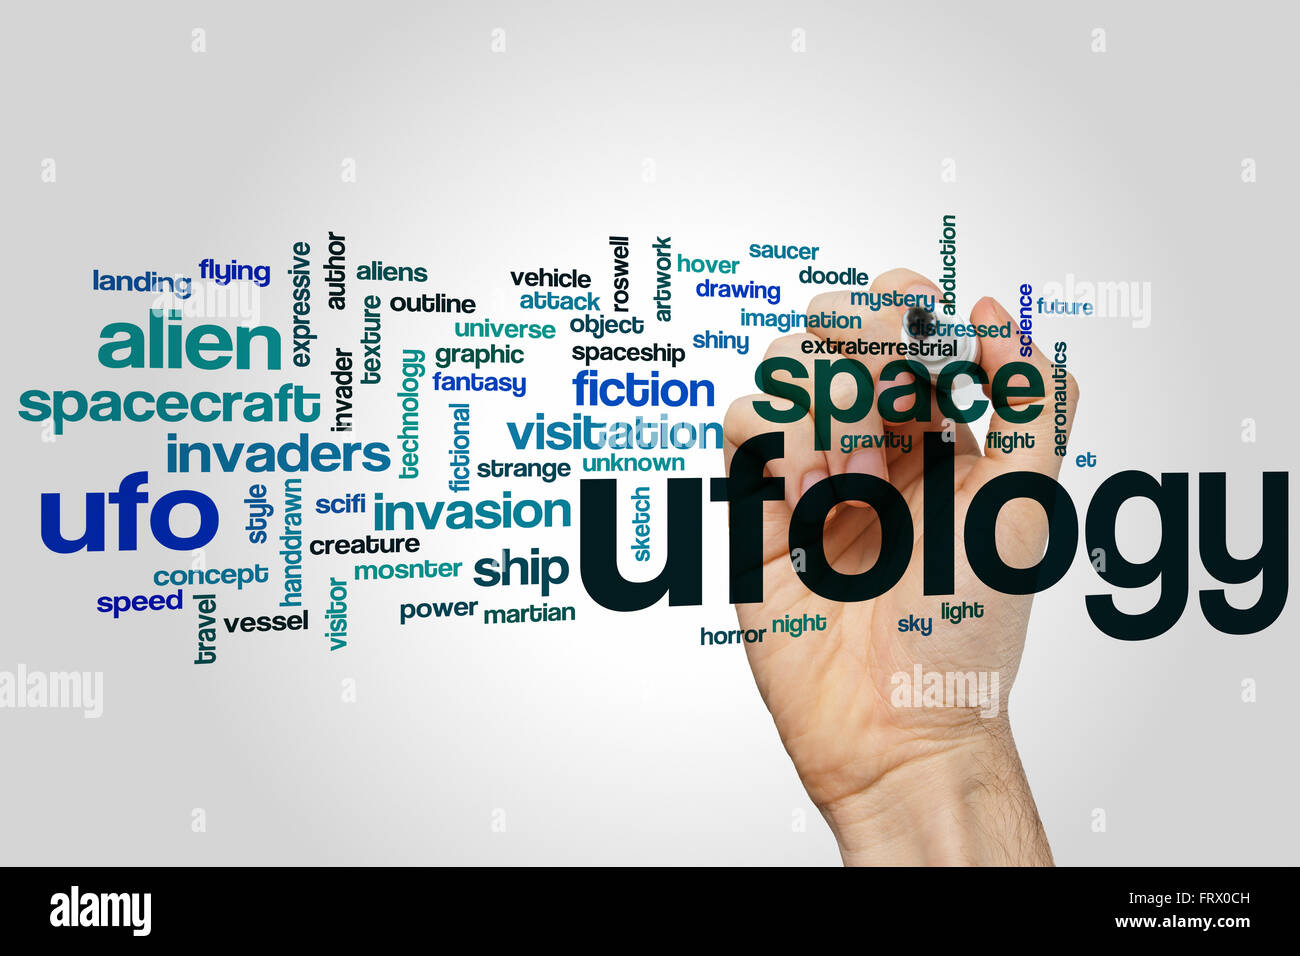 Ufology word cloud concept with alien invasion related tags Stock Photo